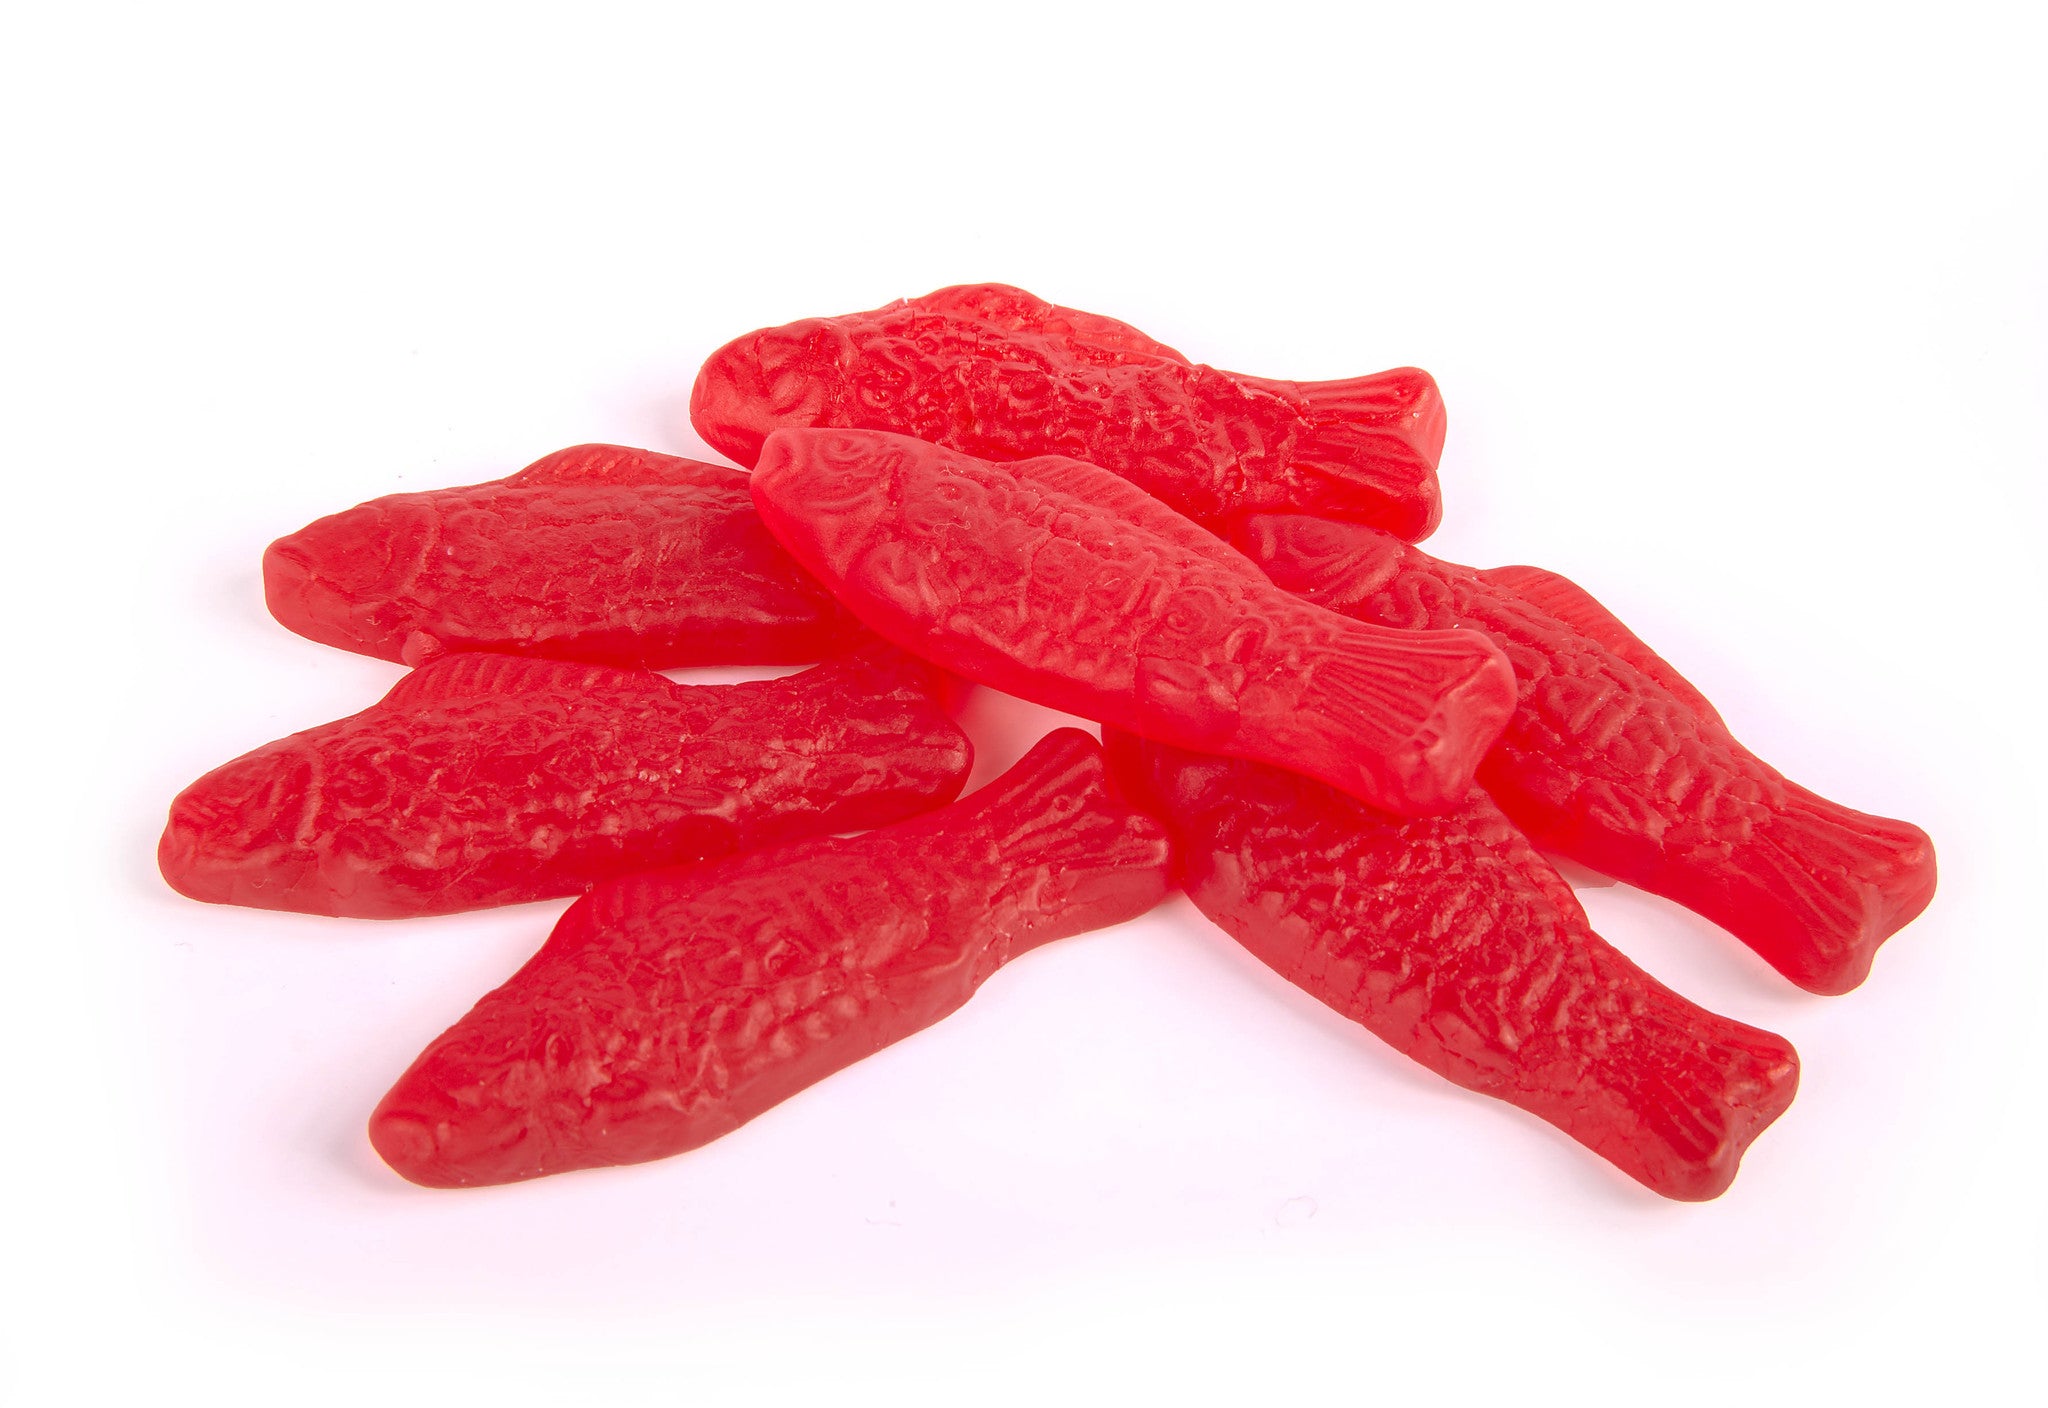 Red Swedish Fish – Candy Kitchen Shoppes